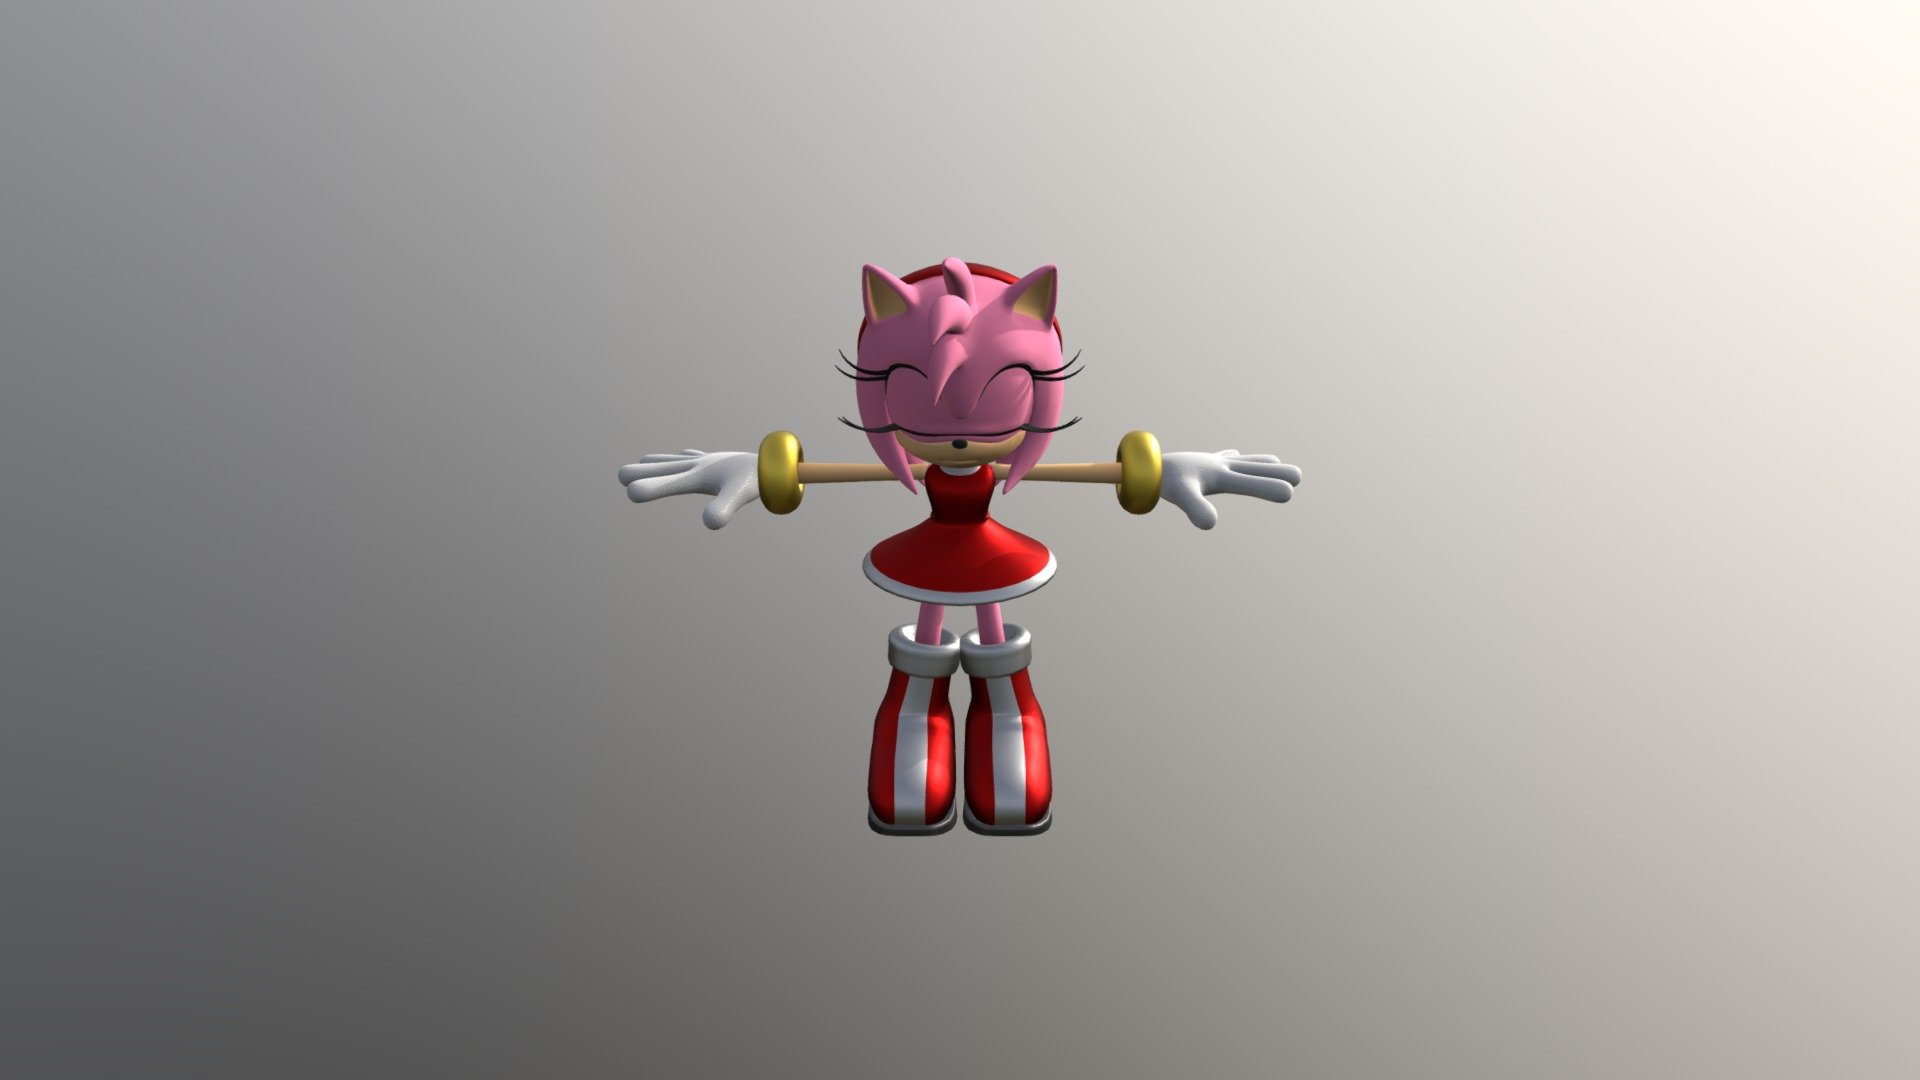 PC Computer - Sonic Forces - Amy Rose - 3D model by sanic111111a.